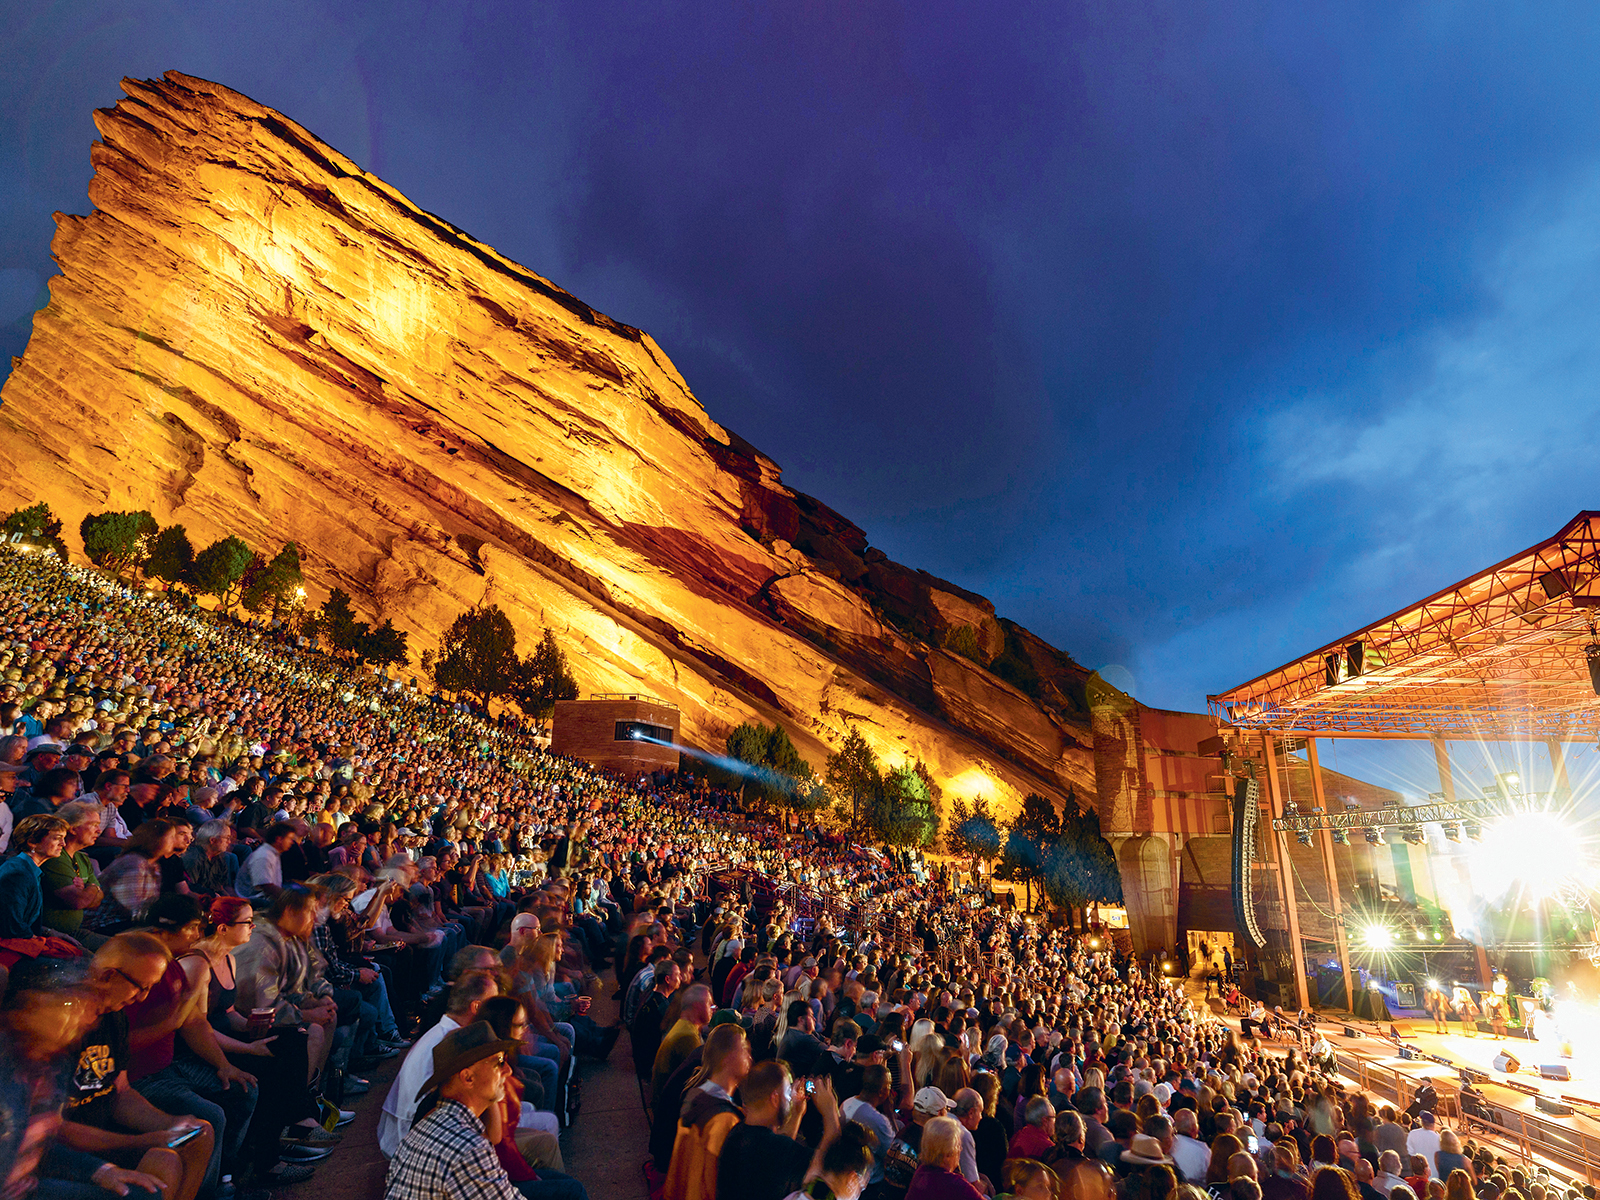 A full crowd watch a concert at Red Rocks Amphitheatre, near Denver, Colorado